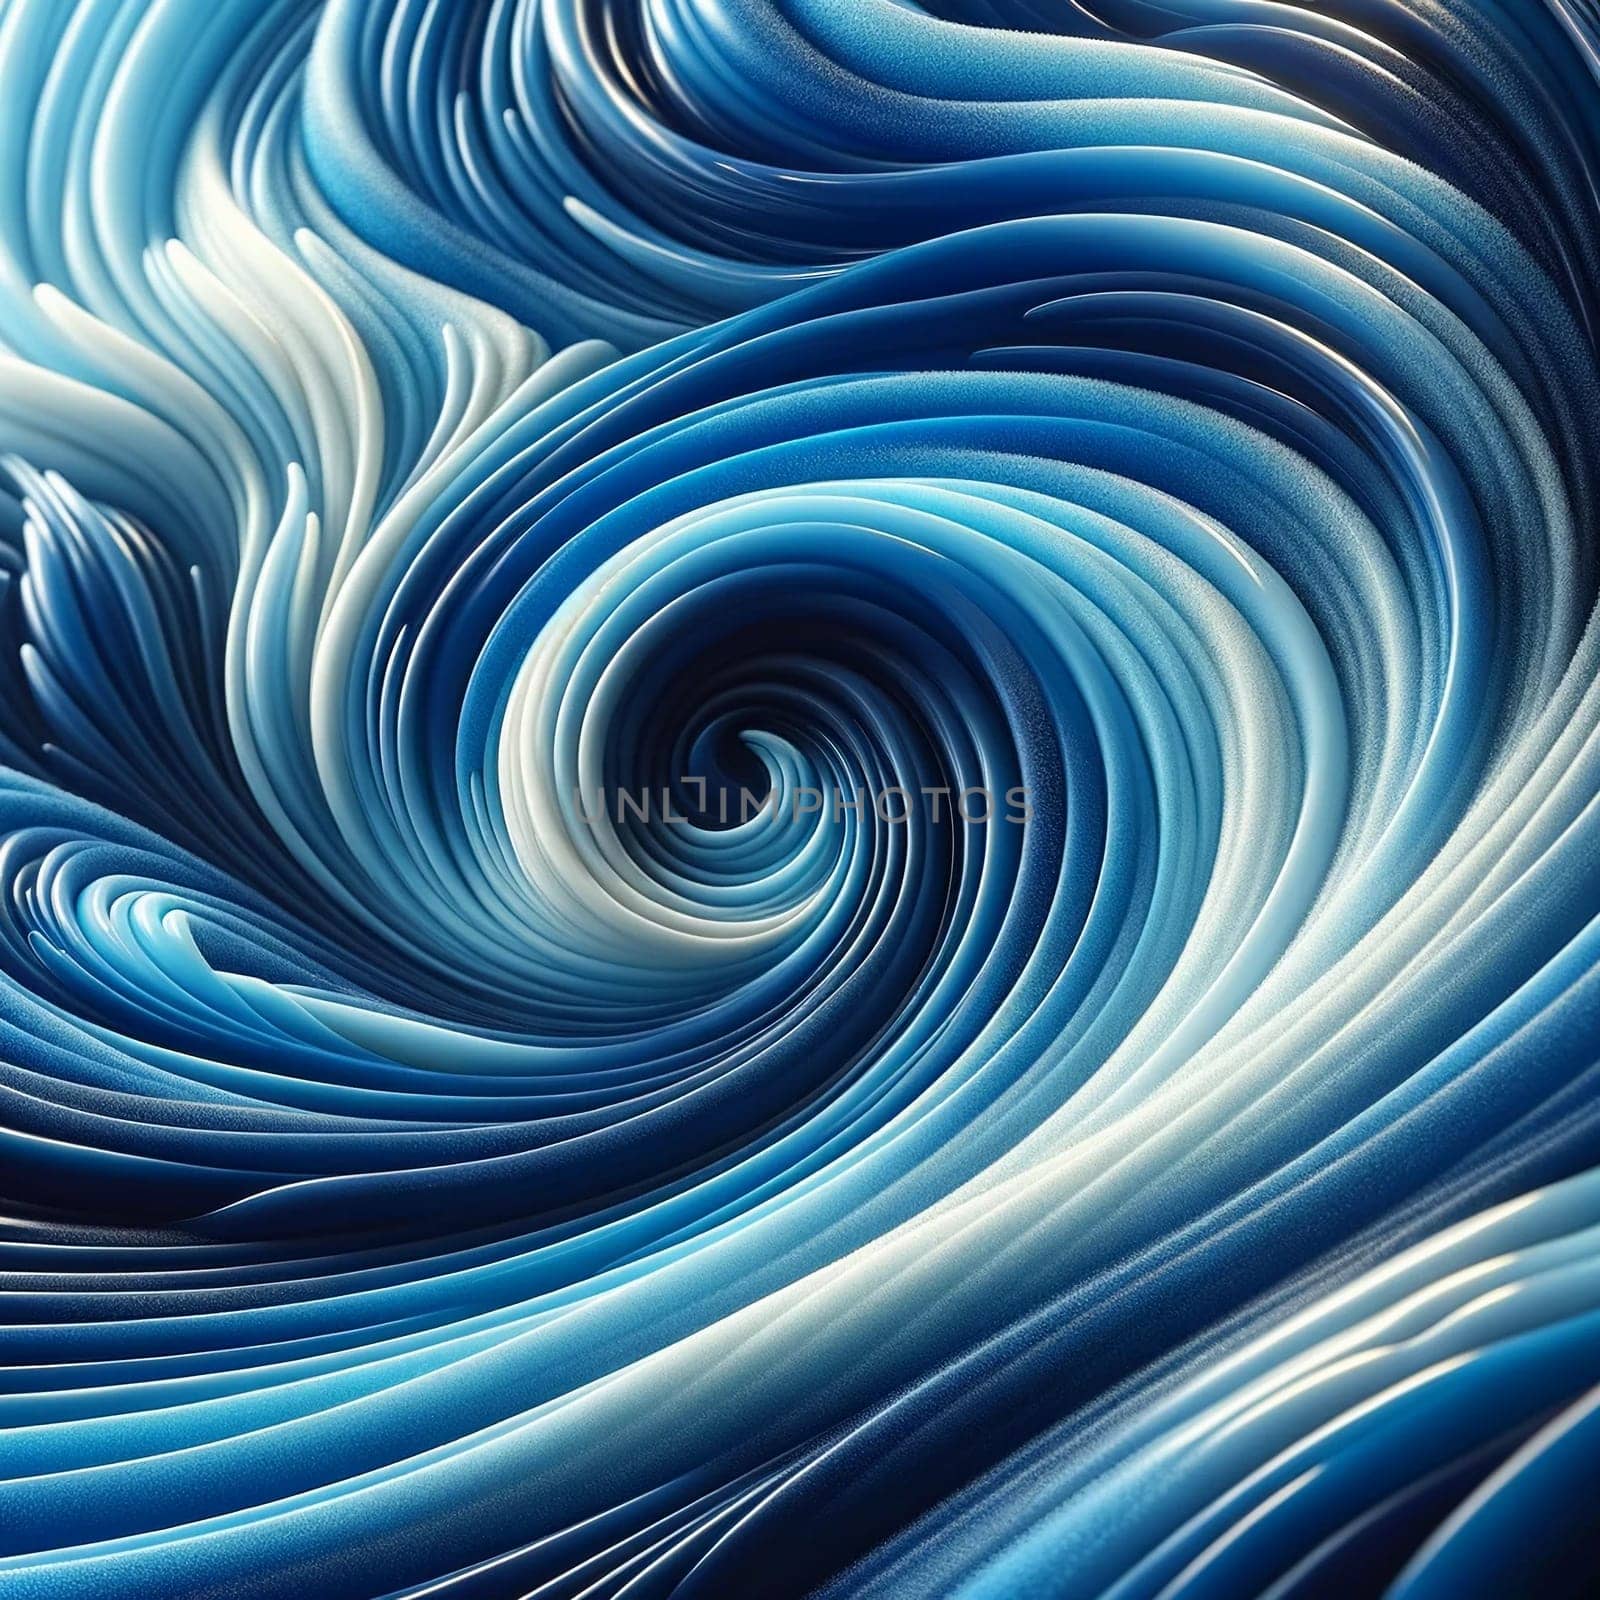 Blue and White Swirl Background by Nadtochiy